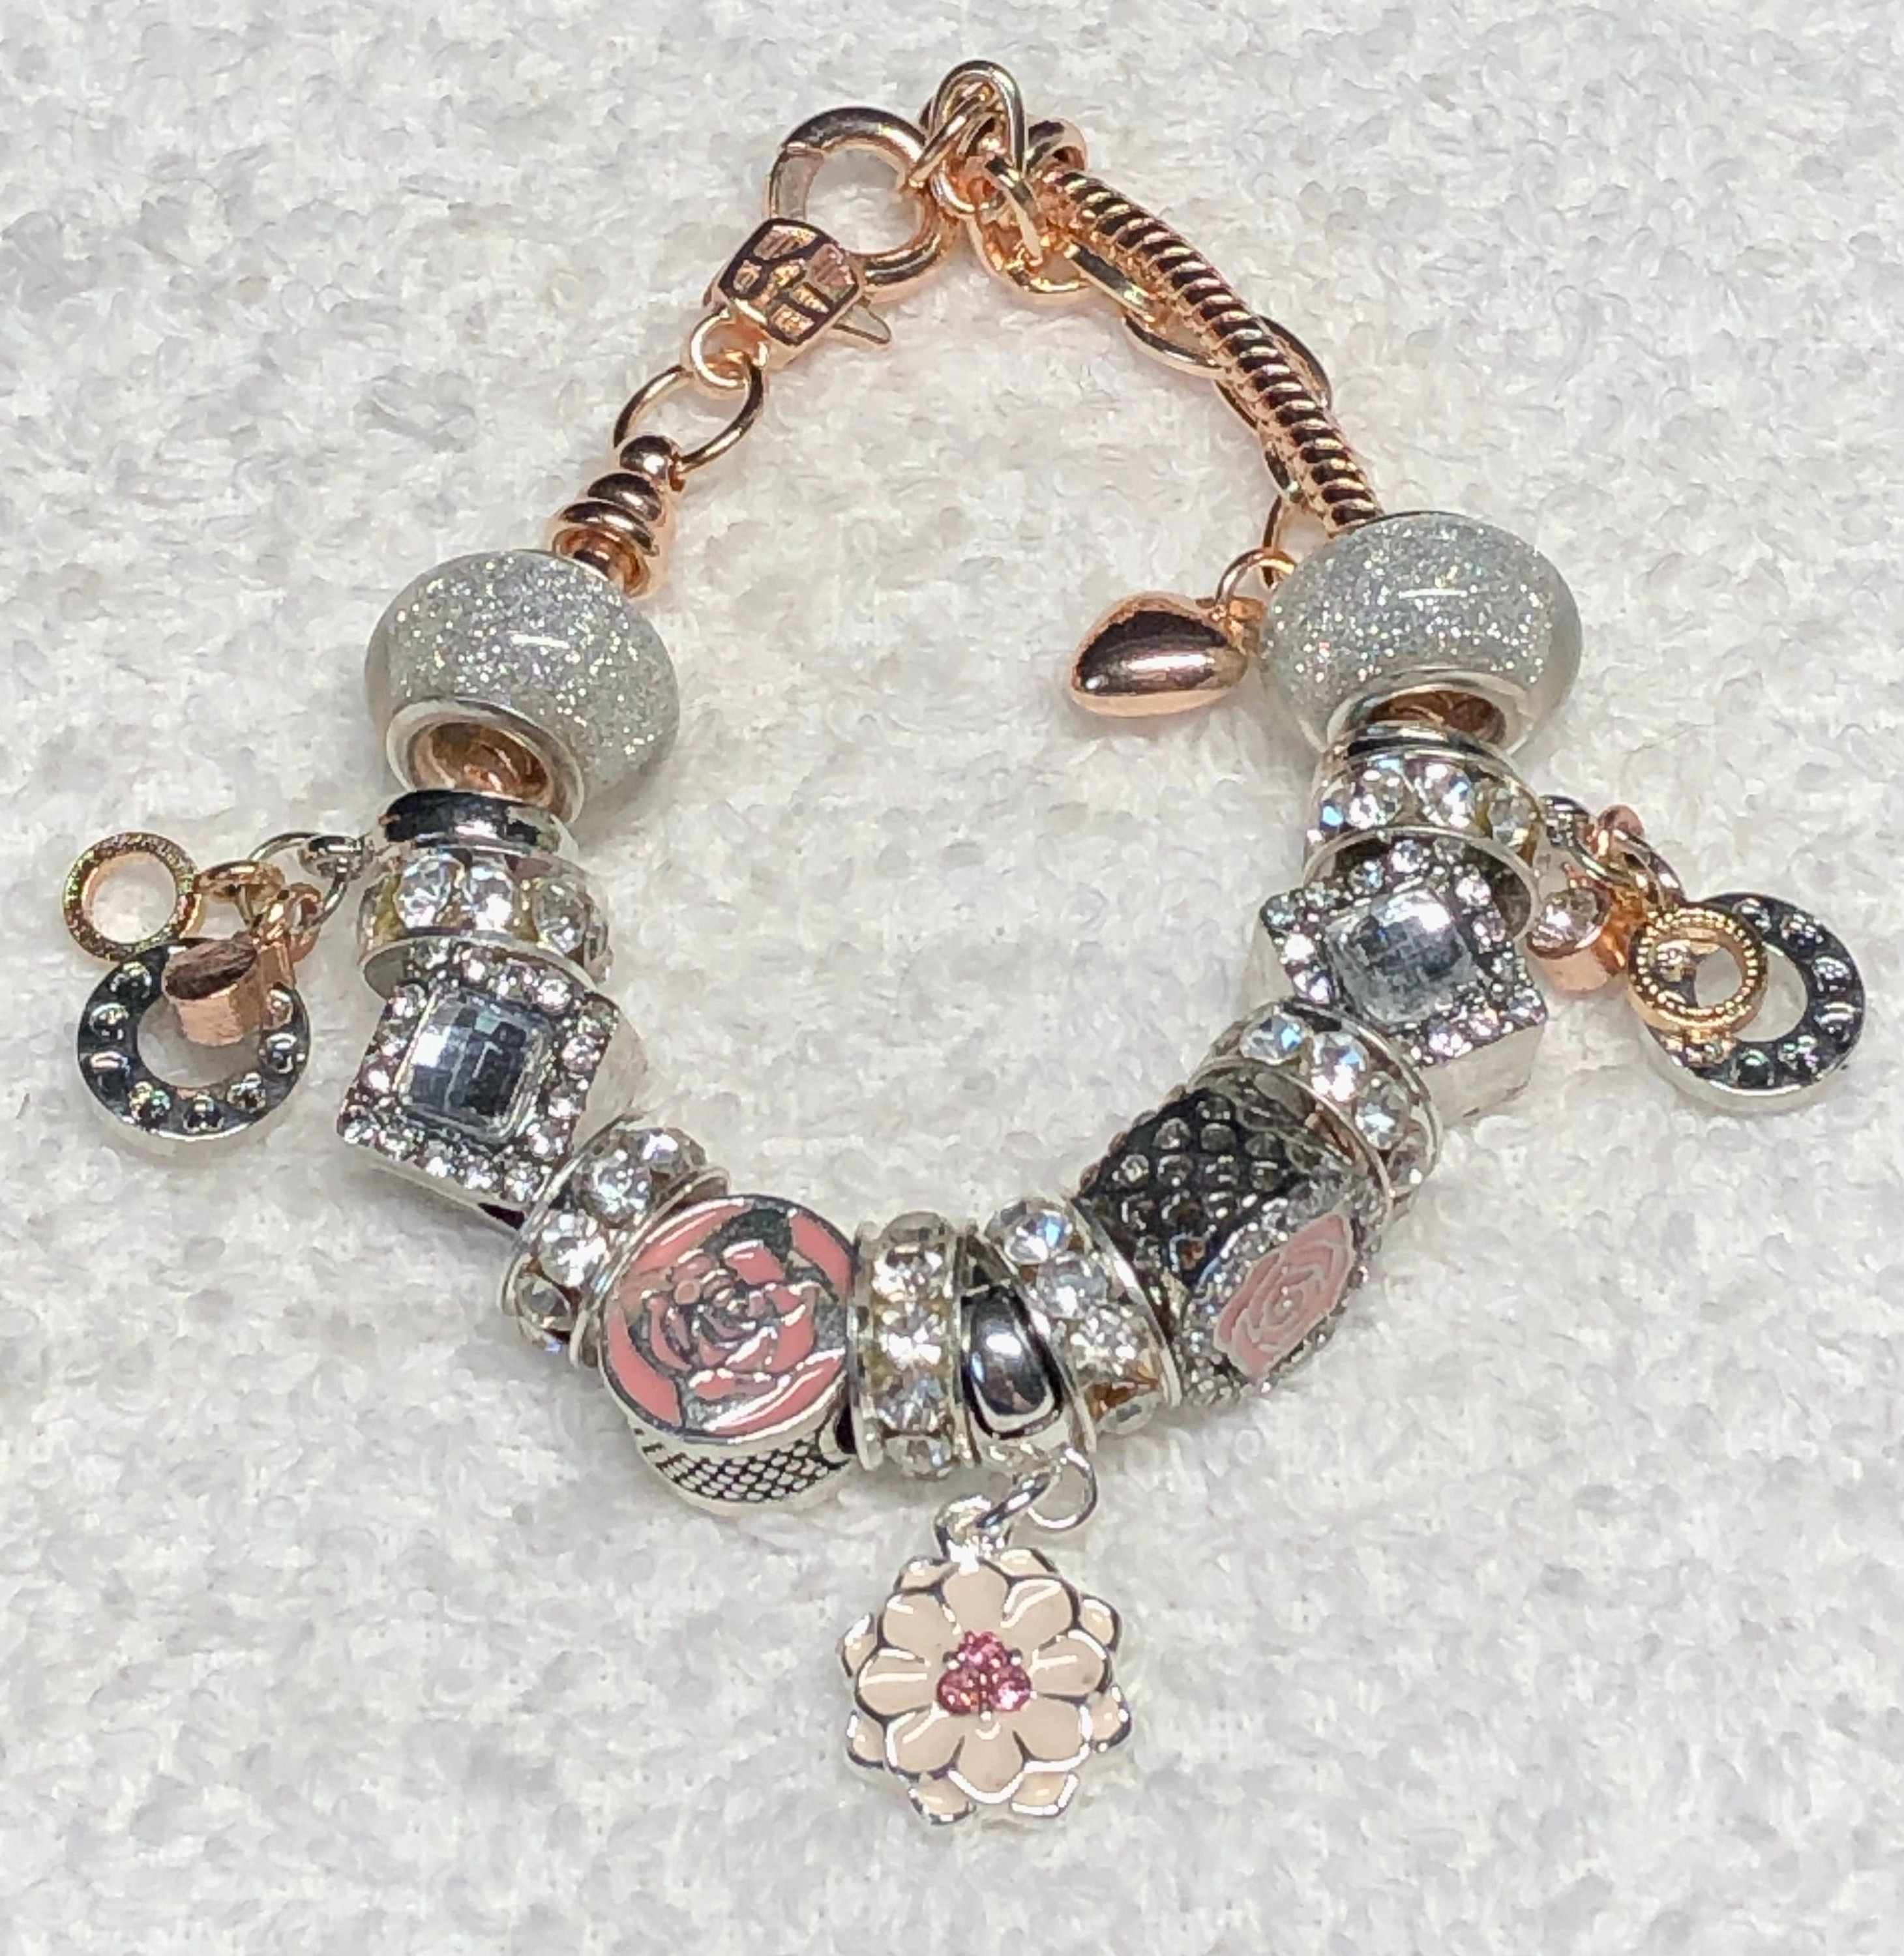 Pandora Bracelet With Sweets Themed Charms -   Pandora bracelet charms  ideas, Pandora bracelet designs, Pandora bracelet charms